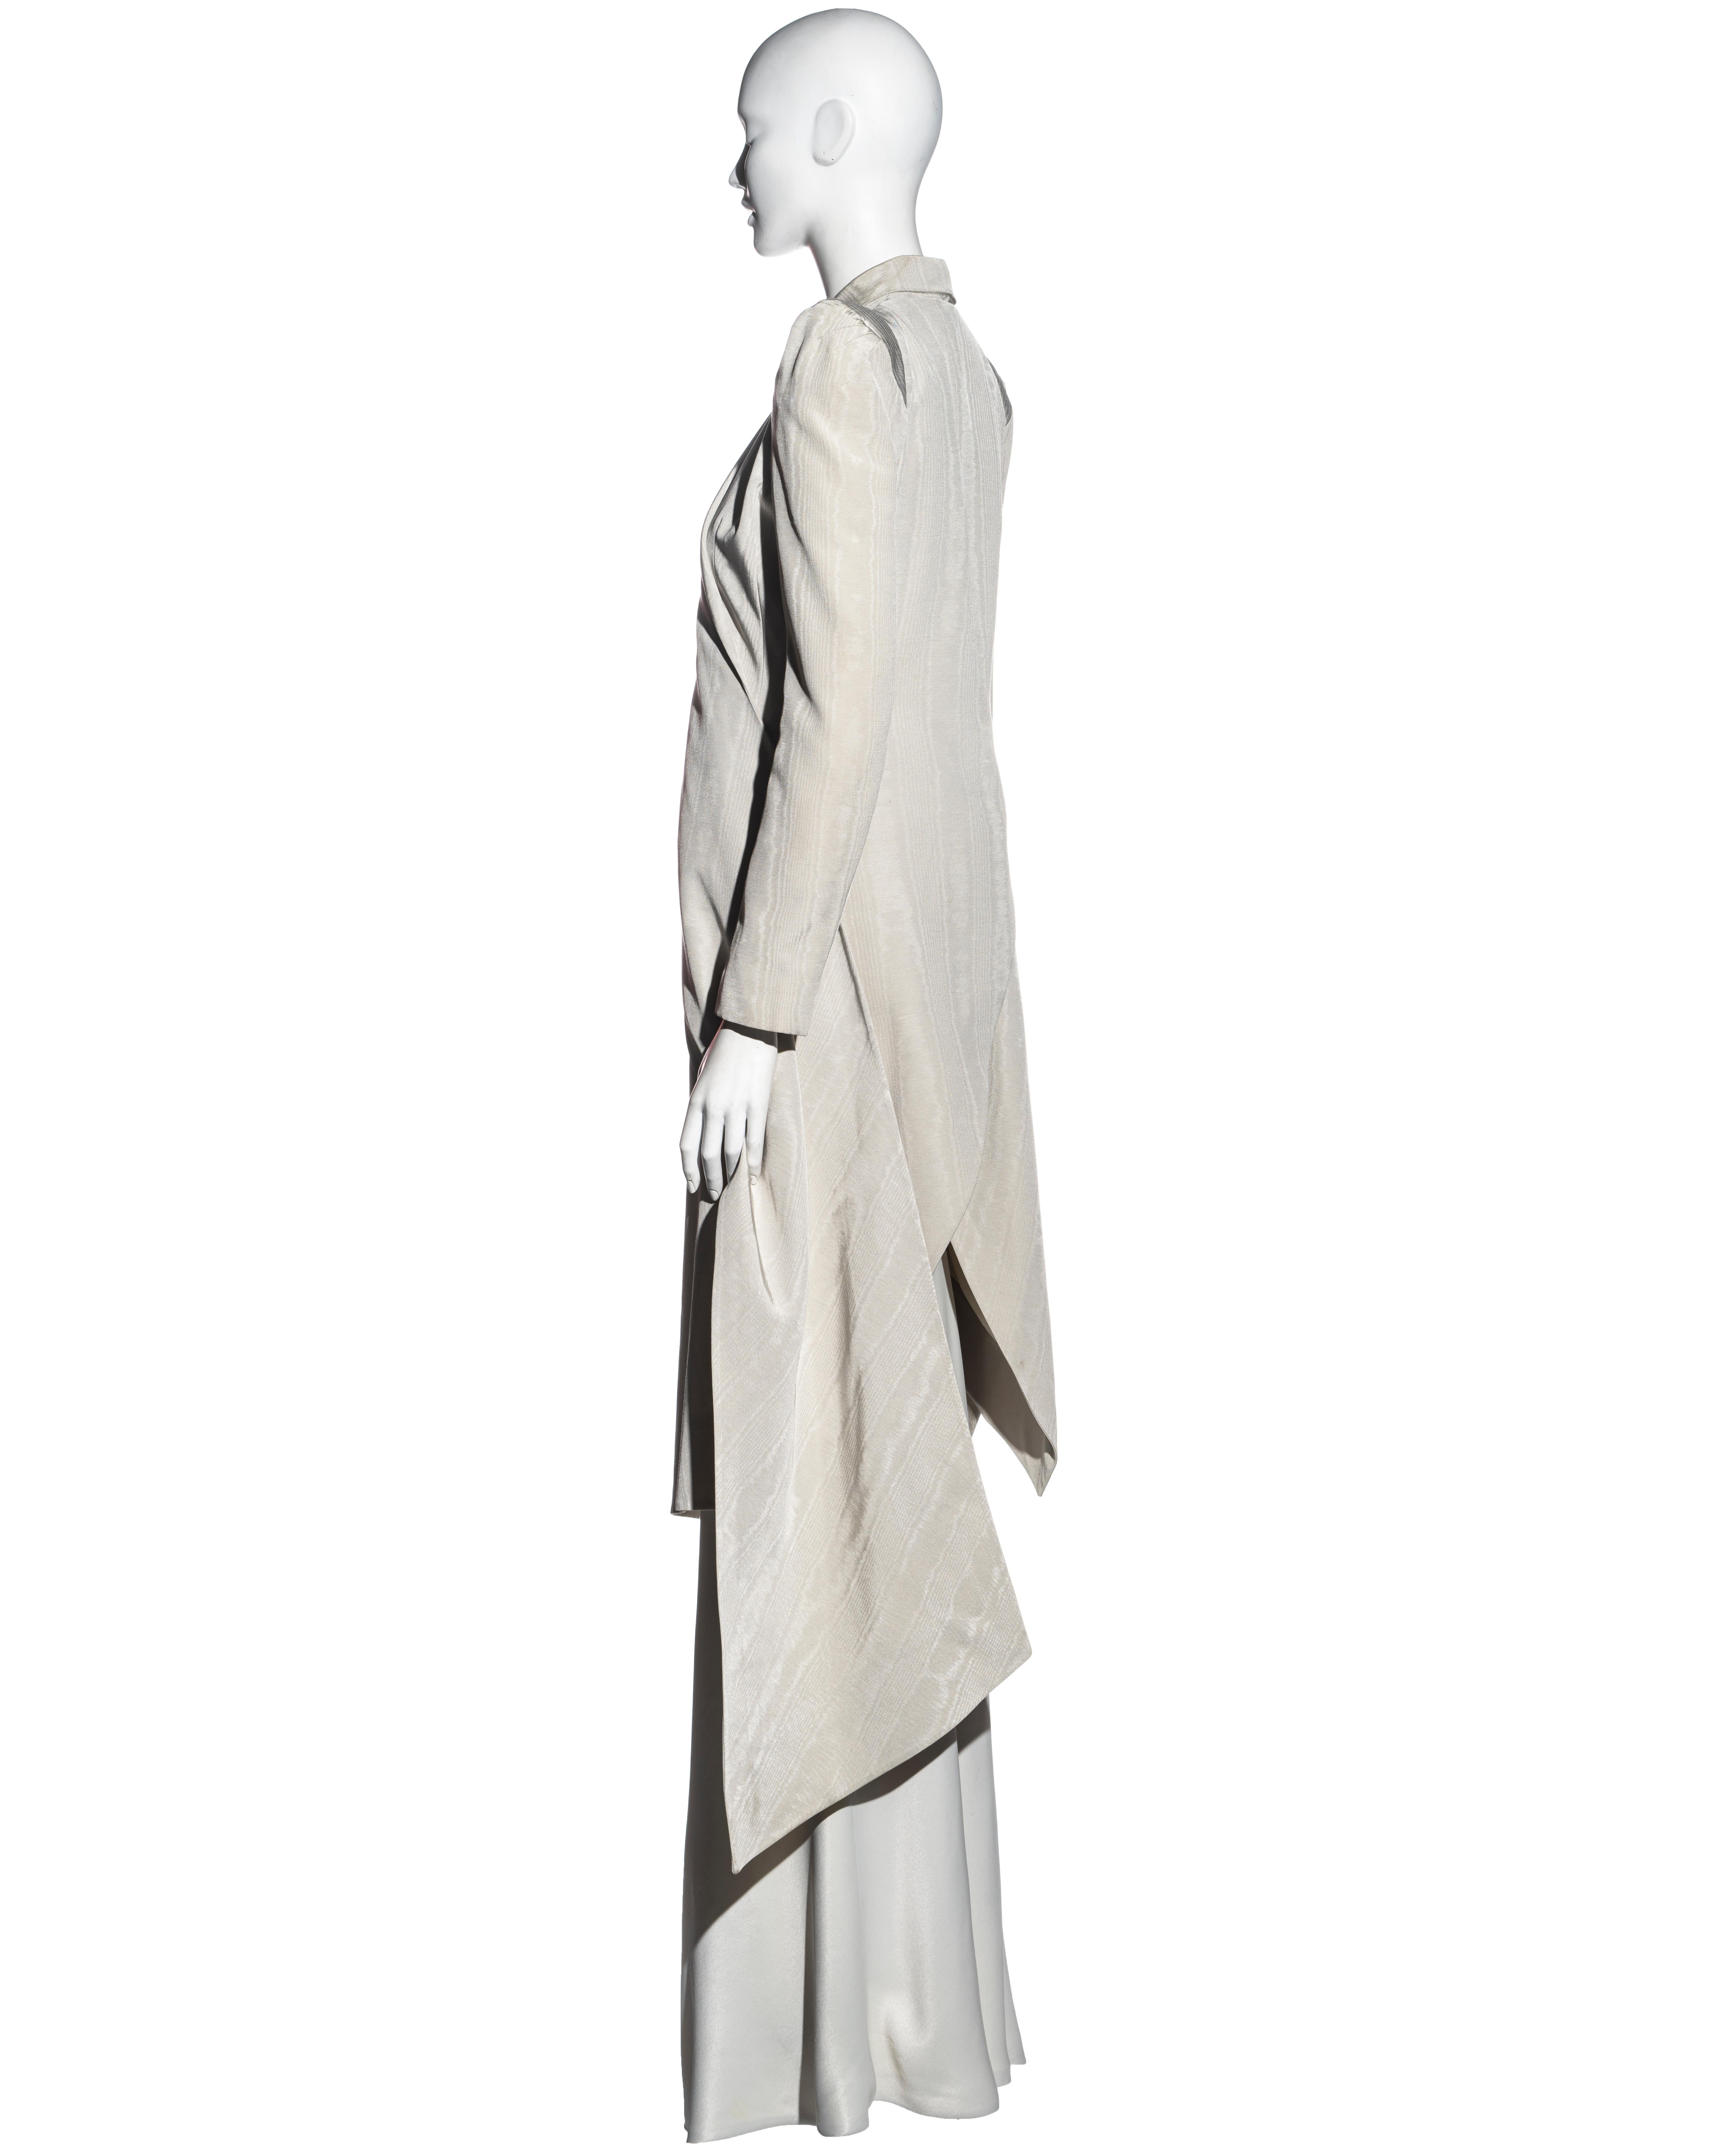 John Galliano dove moiré tailcoat and trained skirt ensemble, ss 1995 1